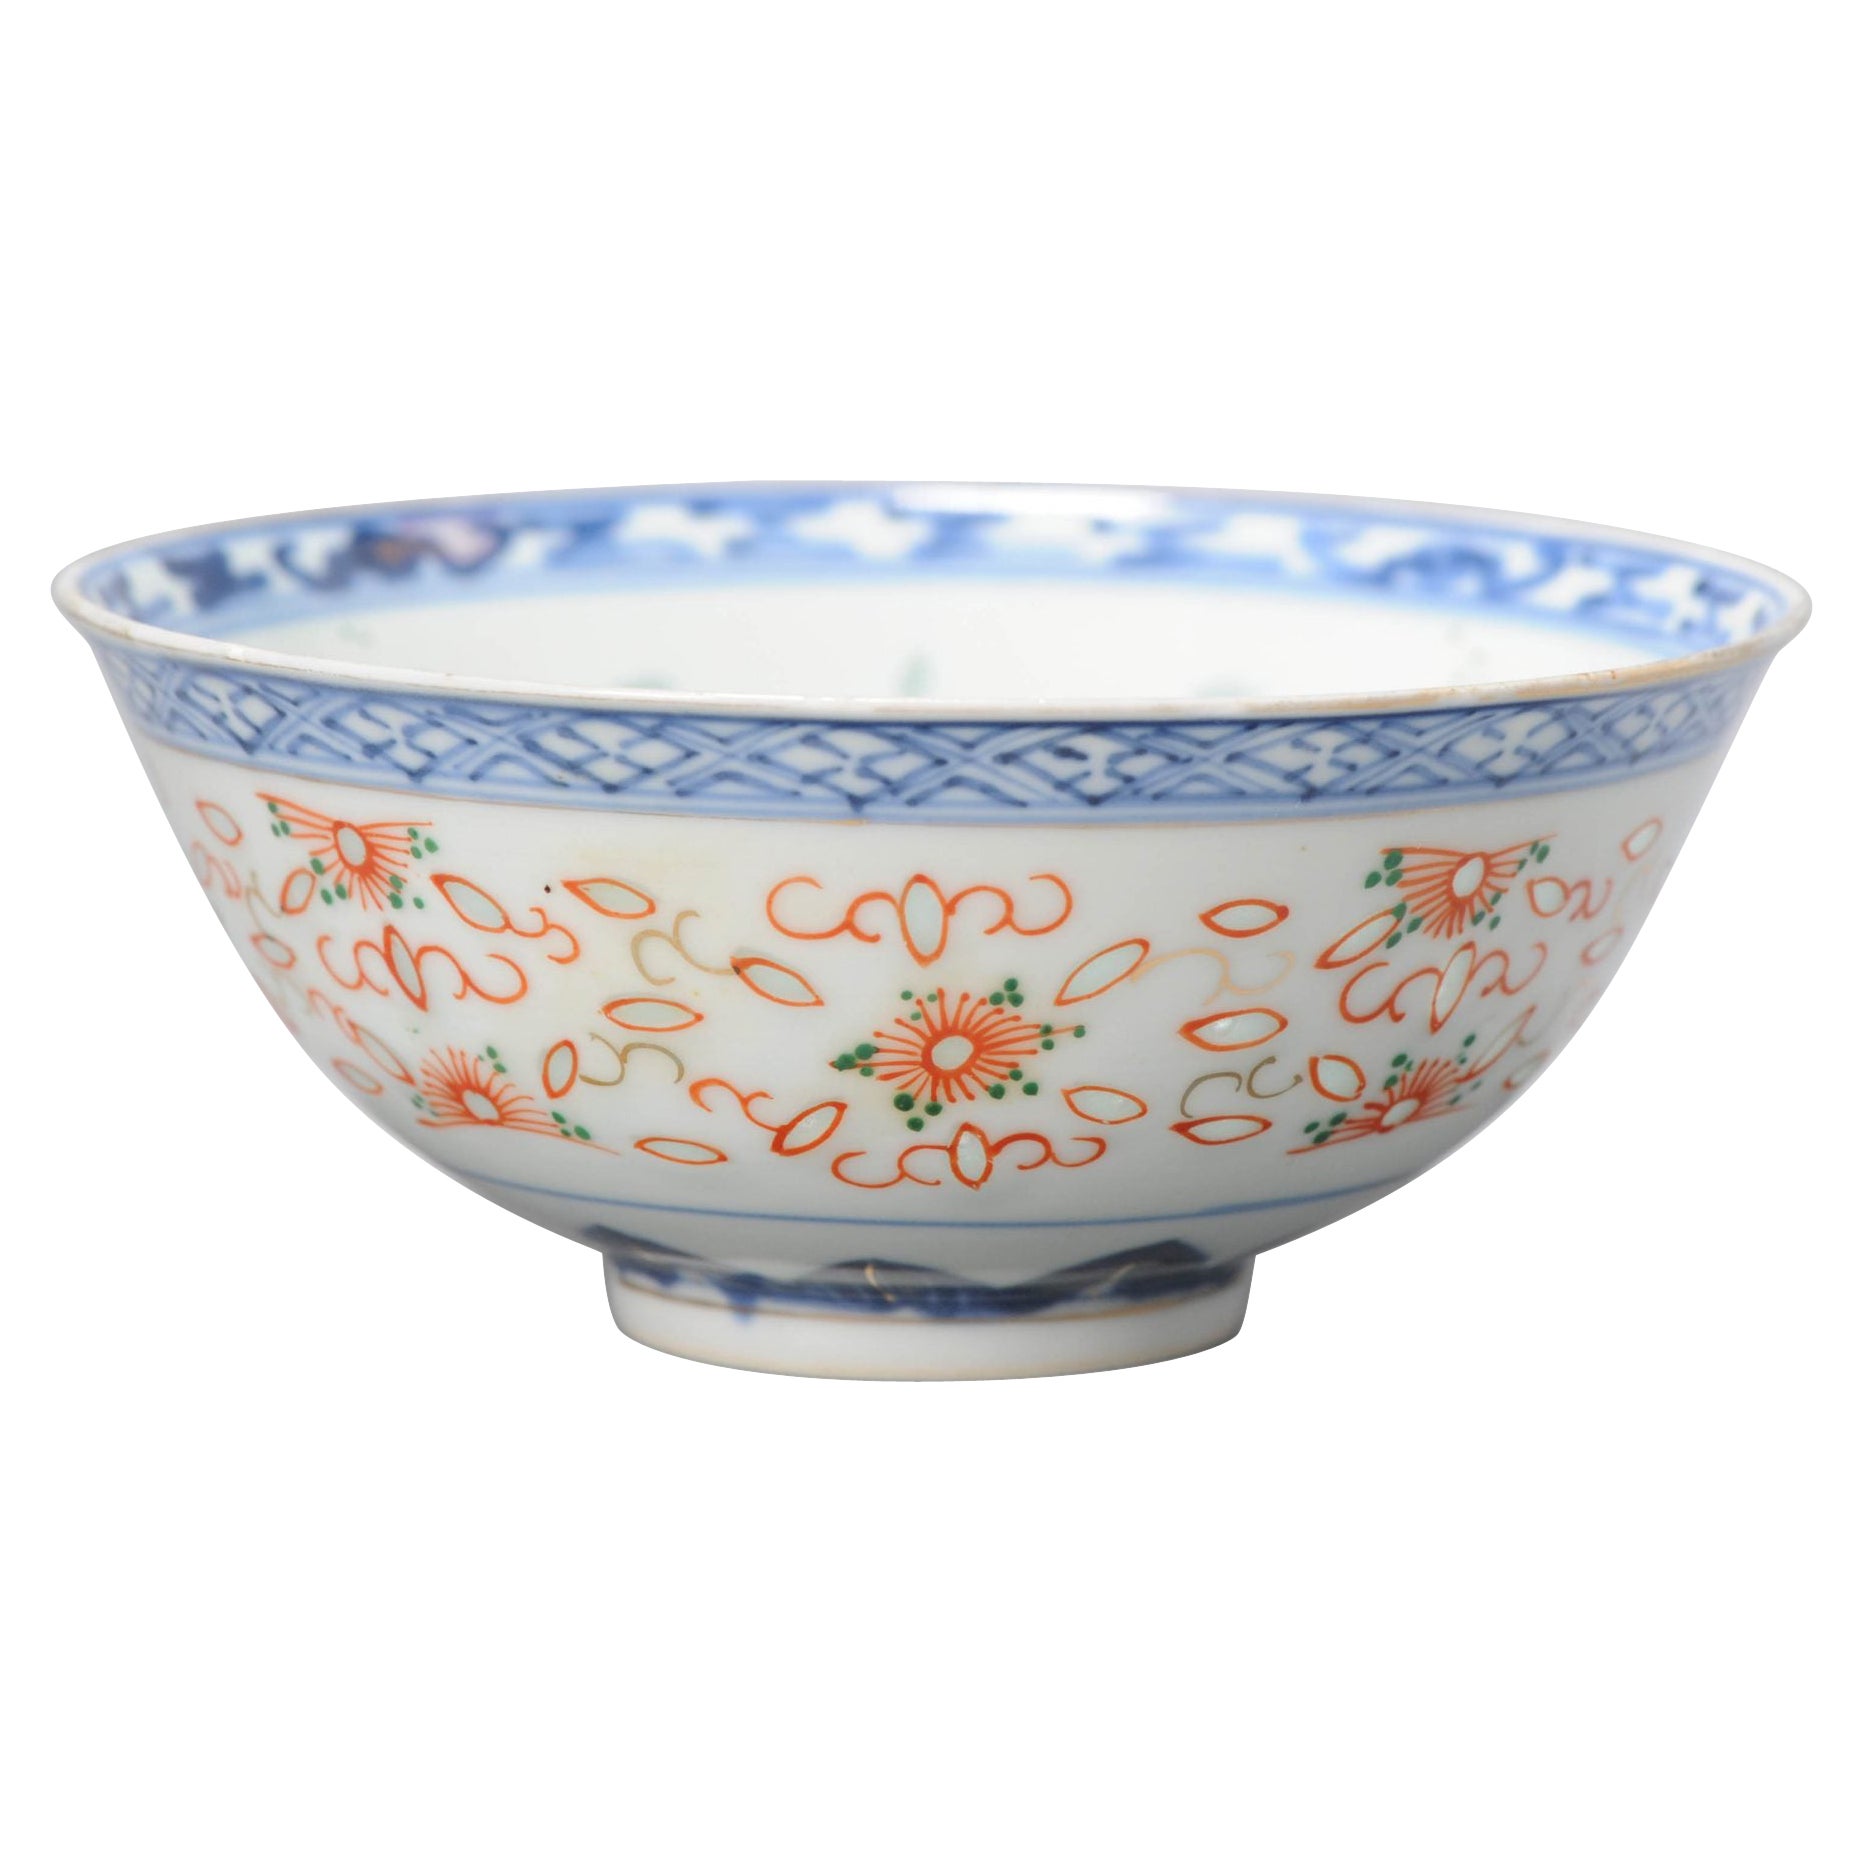 Antique Chinese Republic Period Rice Grain Bowl with Flowers, China 20th Century For Sale